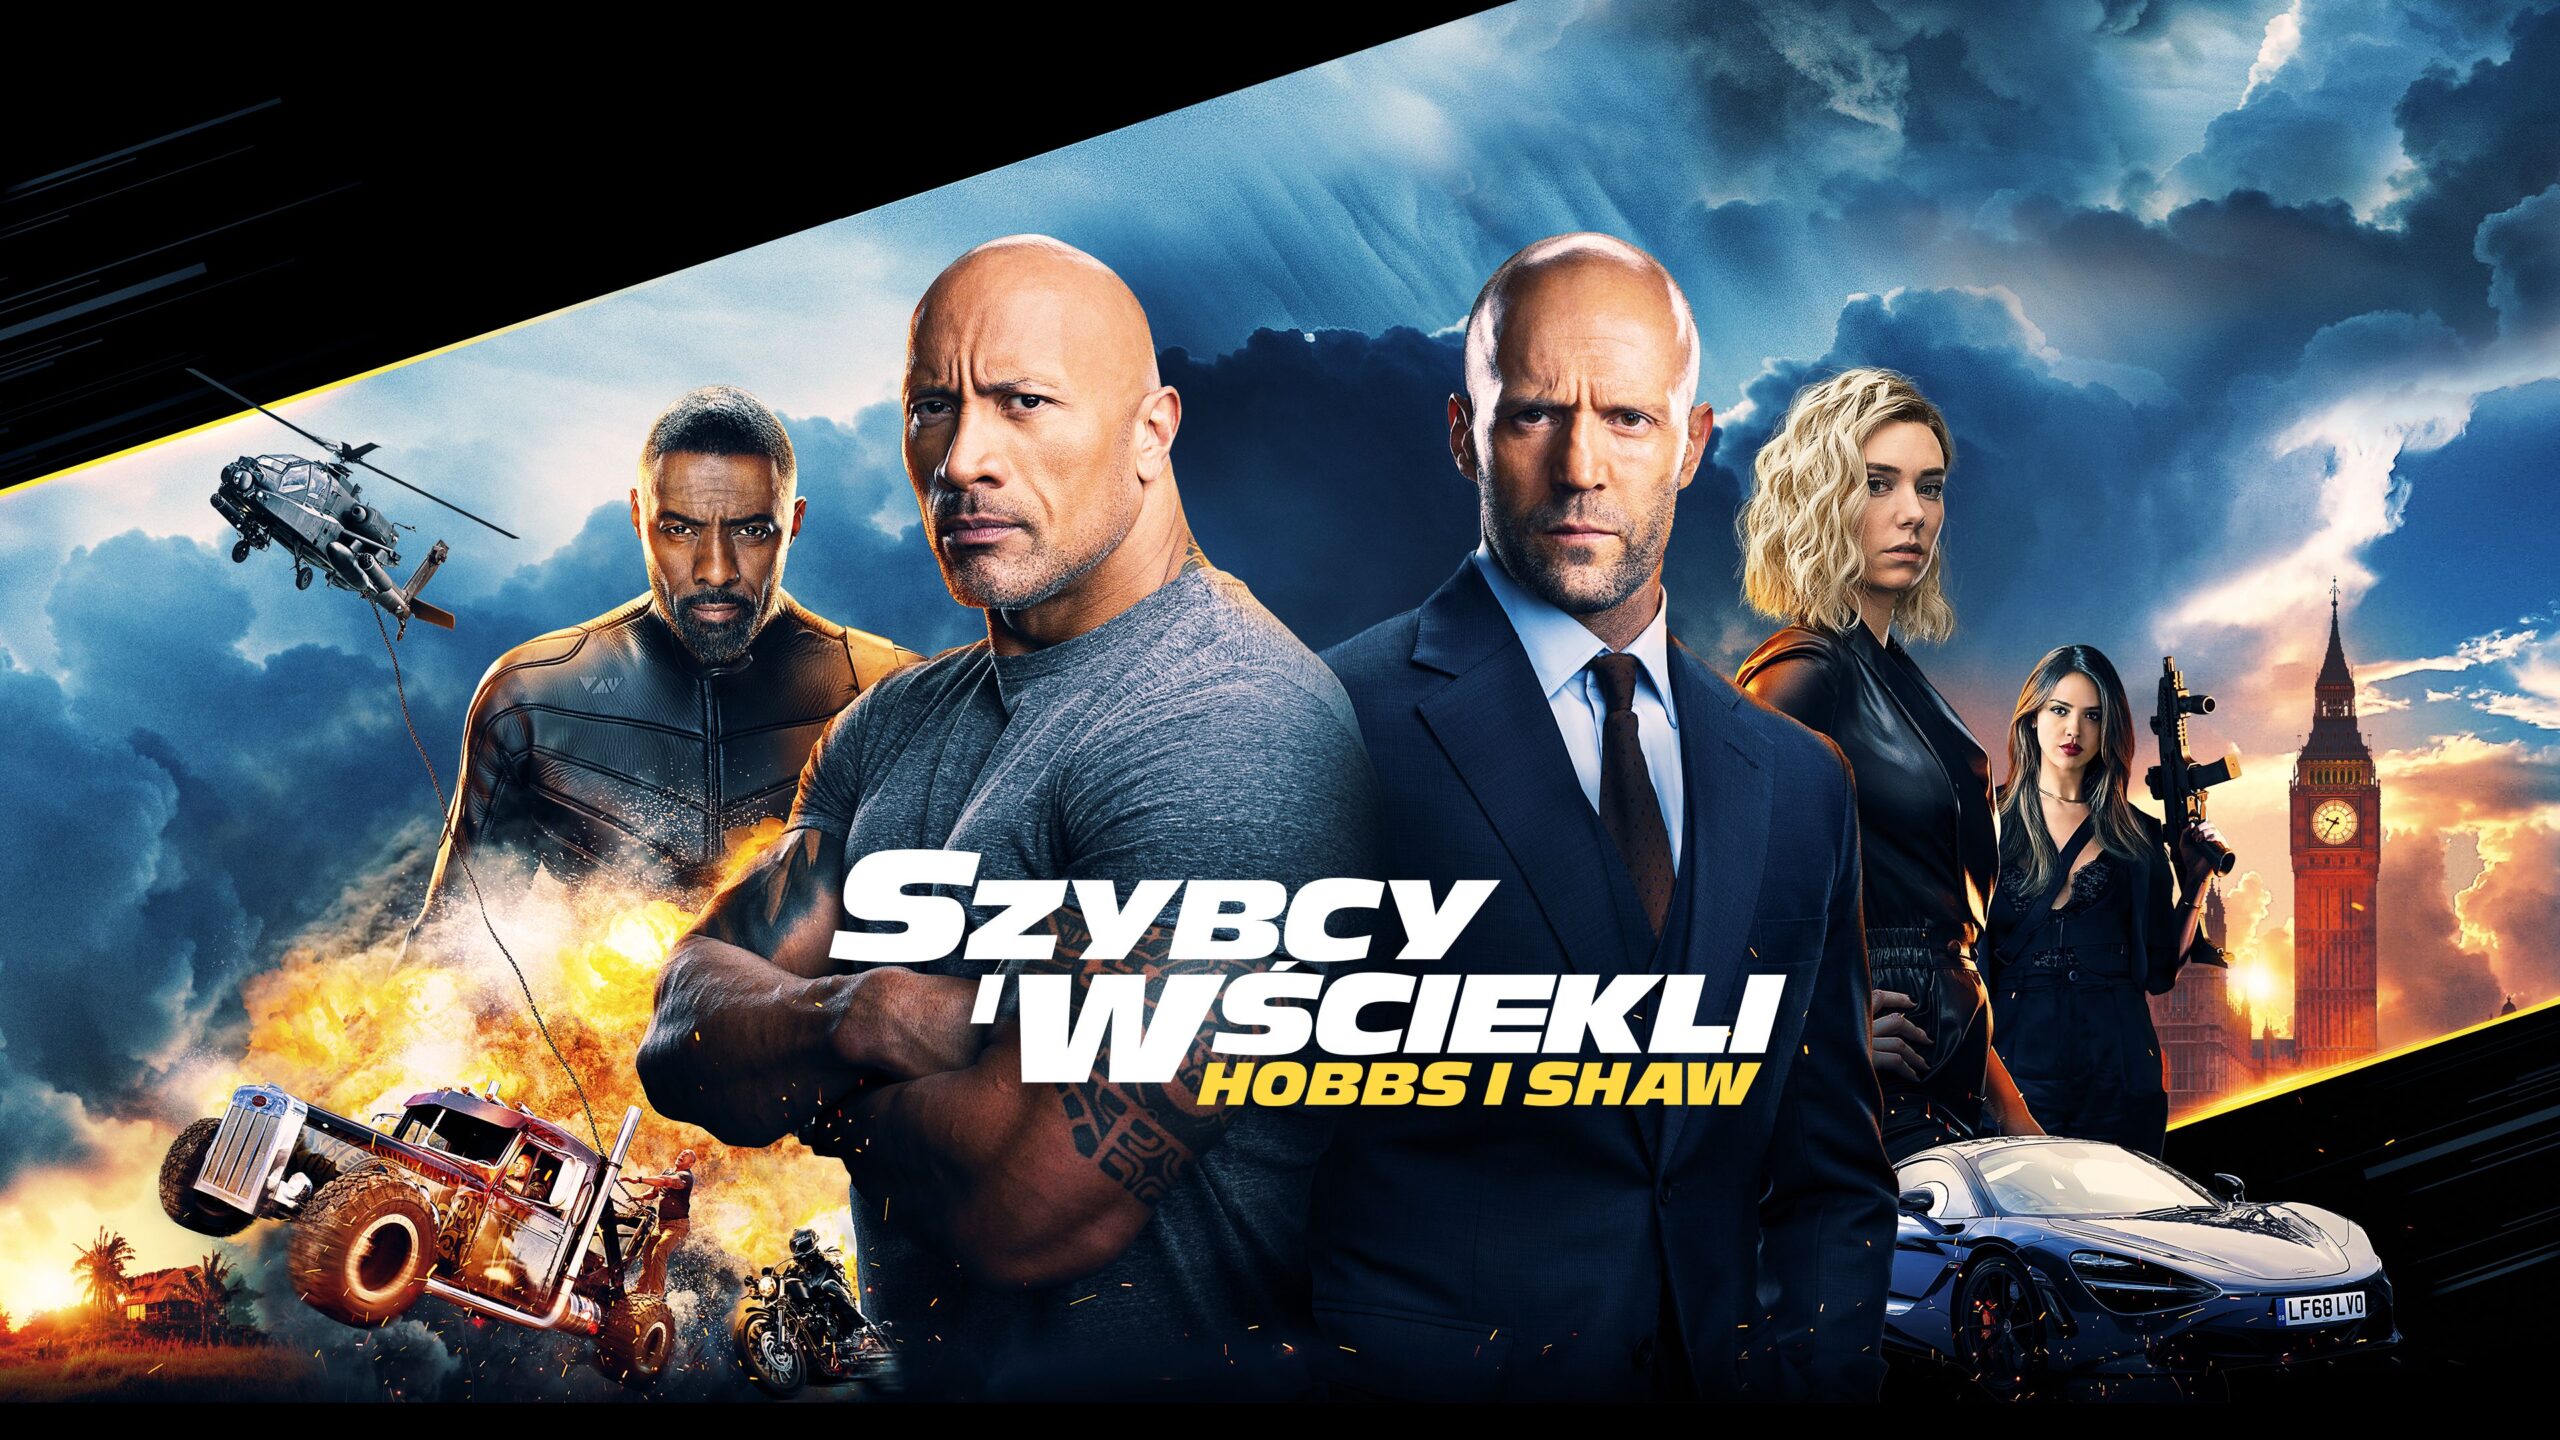 Szybcy i wsciekli Hobbs i Shaw 02 POLSAT © 2019 Universal City Studios Productions LLLP. All Rights Reserved.psd scaled